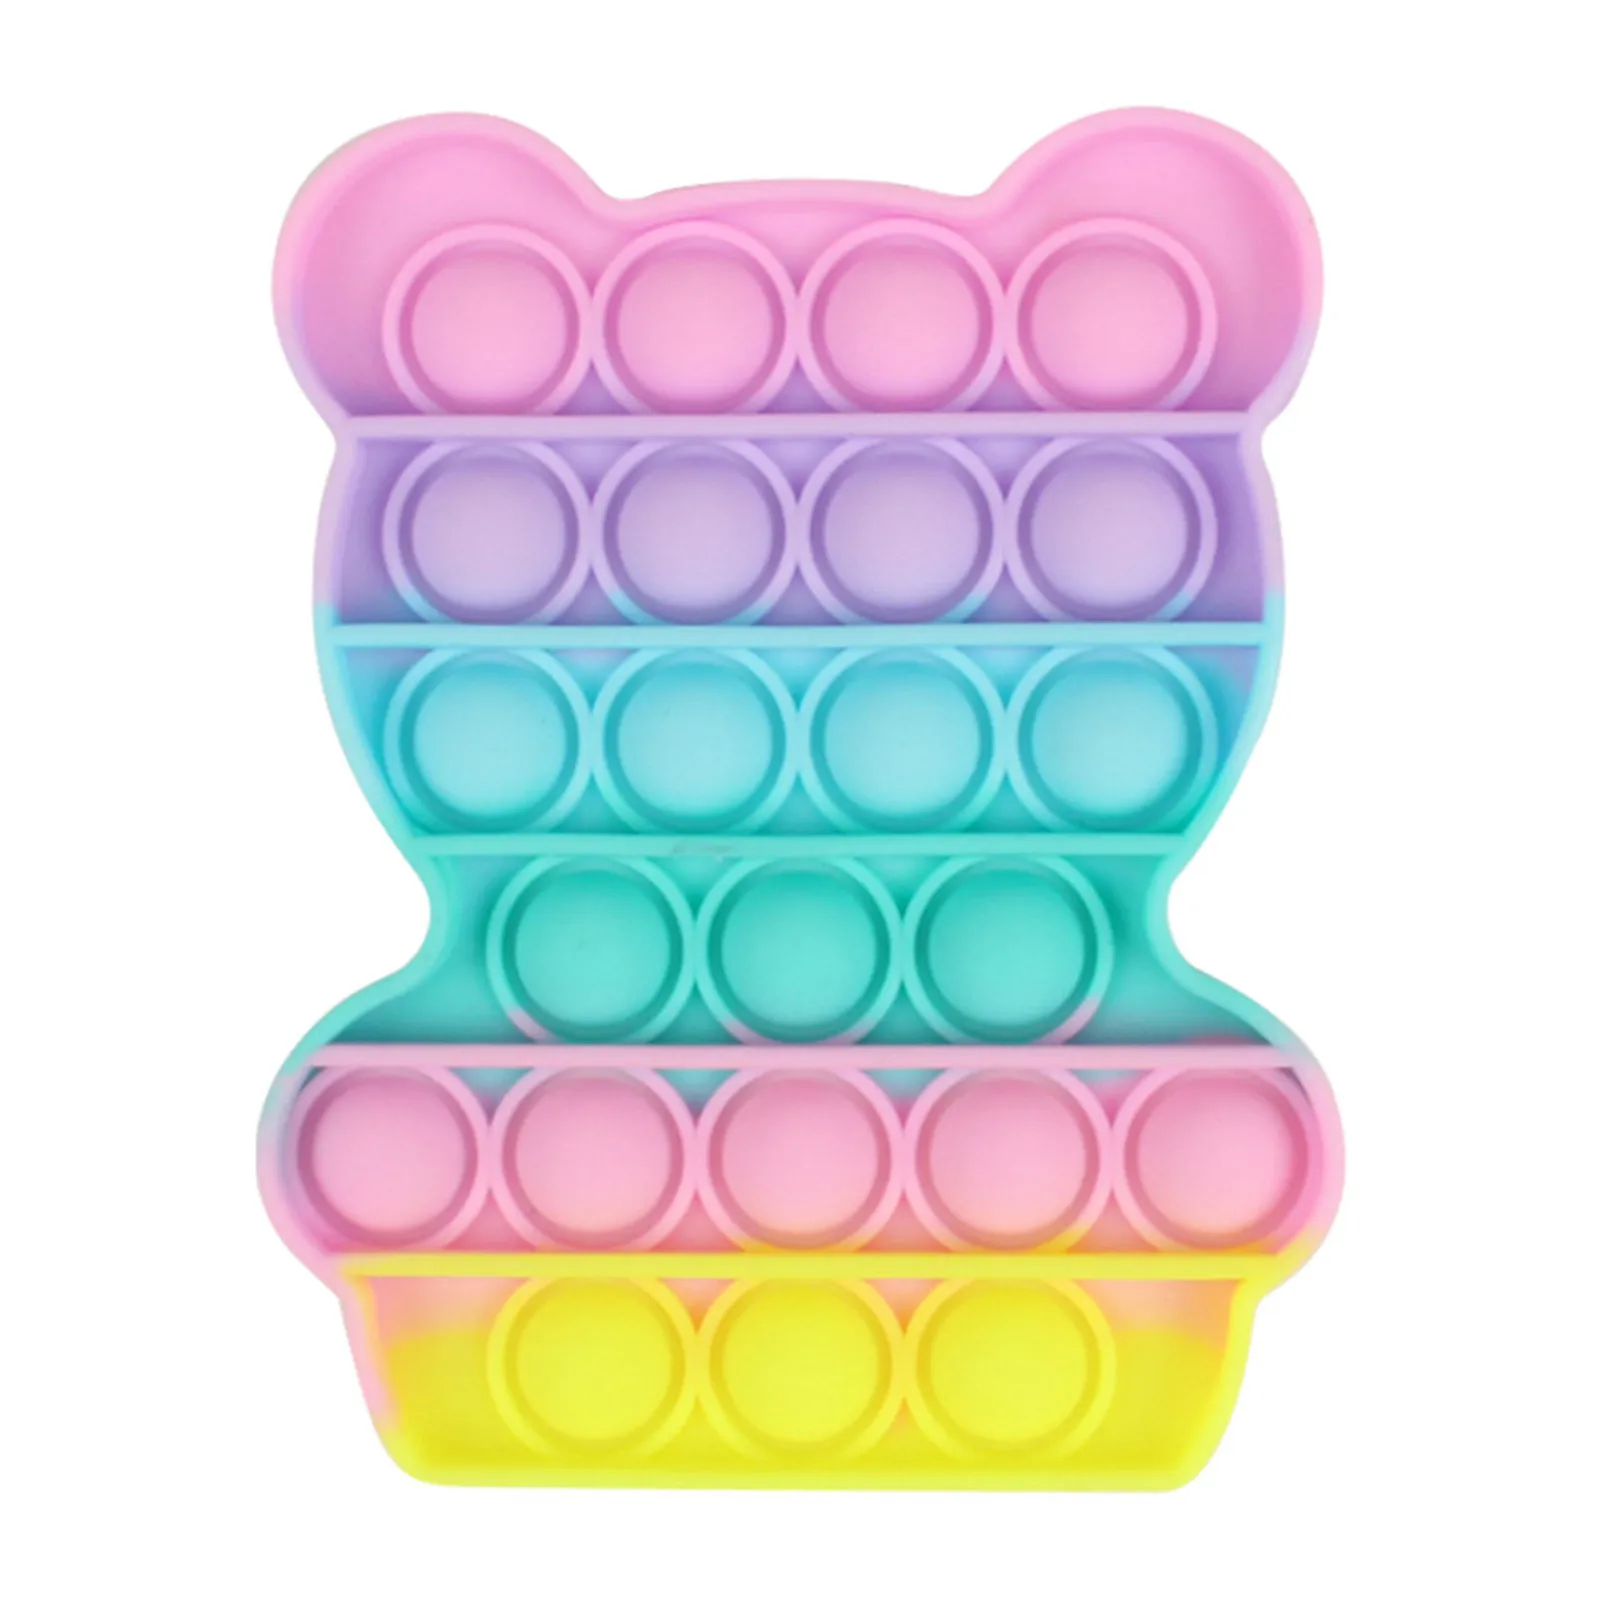 mochi's fidget toys Squishy Fidget Toys Push Toy Square Antistress New Push Bubble Rainbow Popits For Hands Popins Pops Reliver Stress For Adults squeezy toys Squeeze Toys